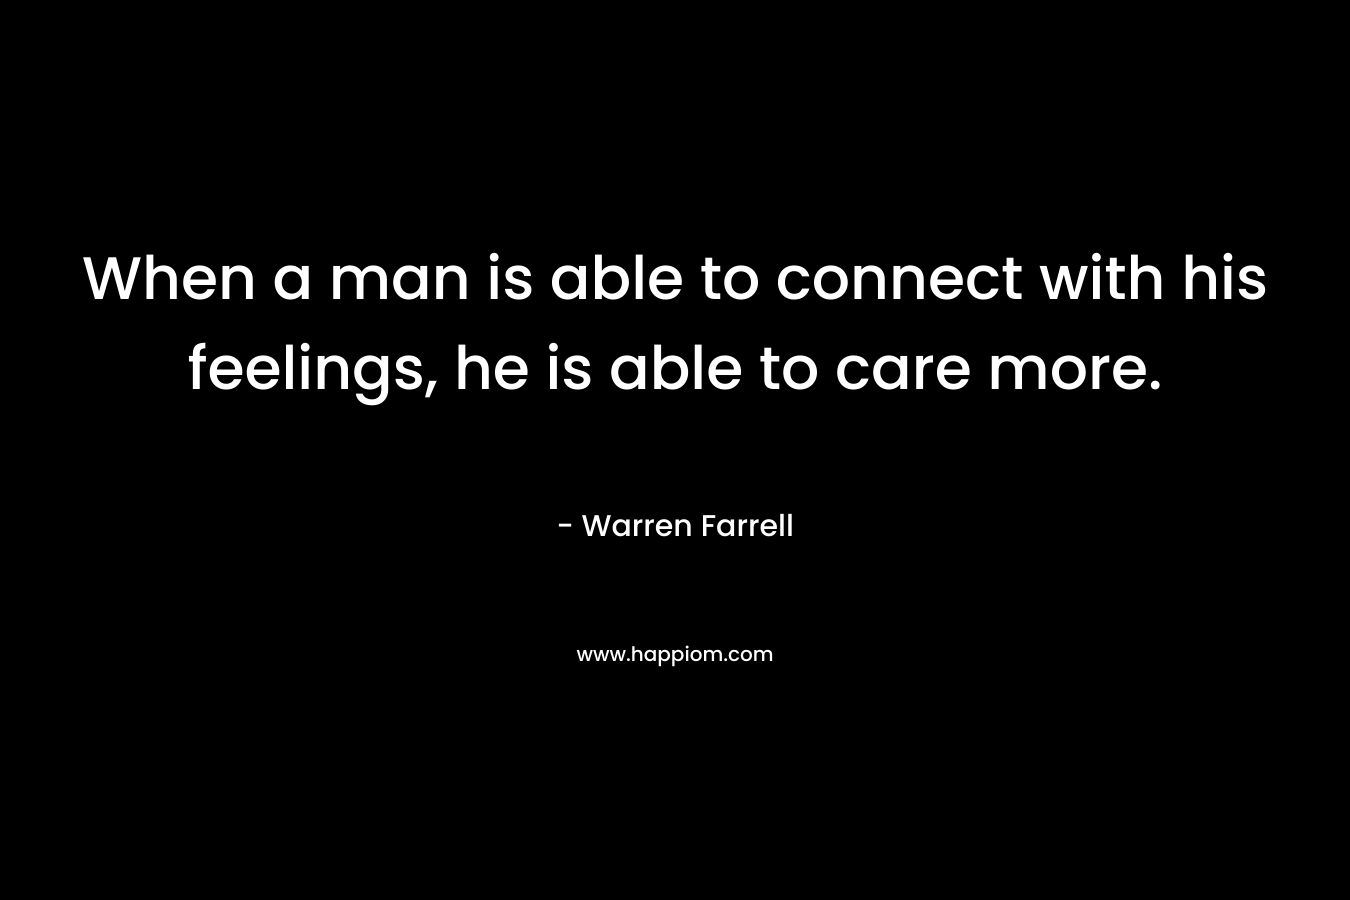 When a man is able to connect with his feelings, he is able to care more. – Warren Farrell